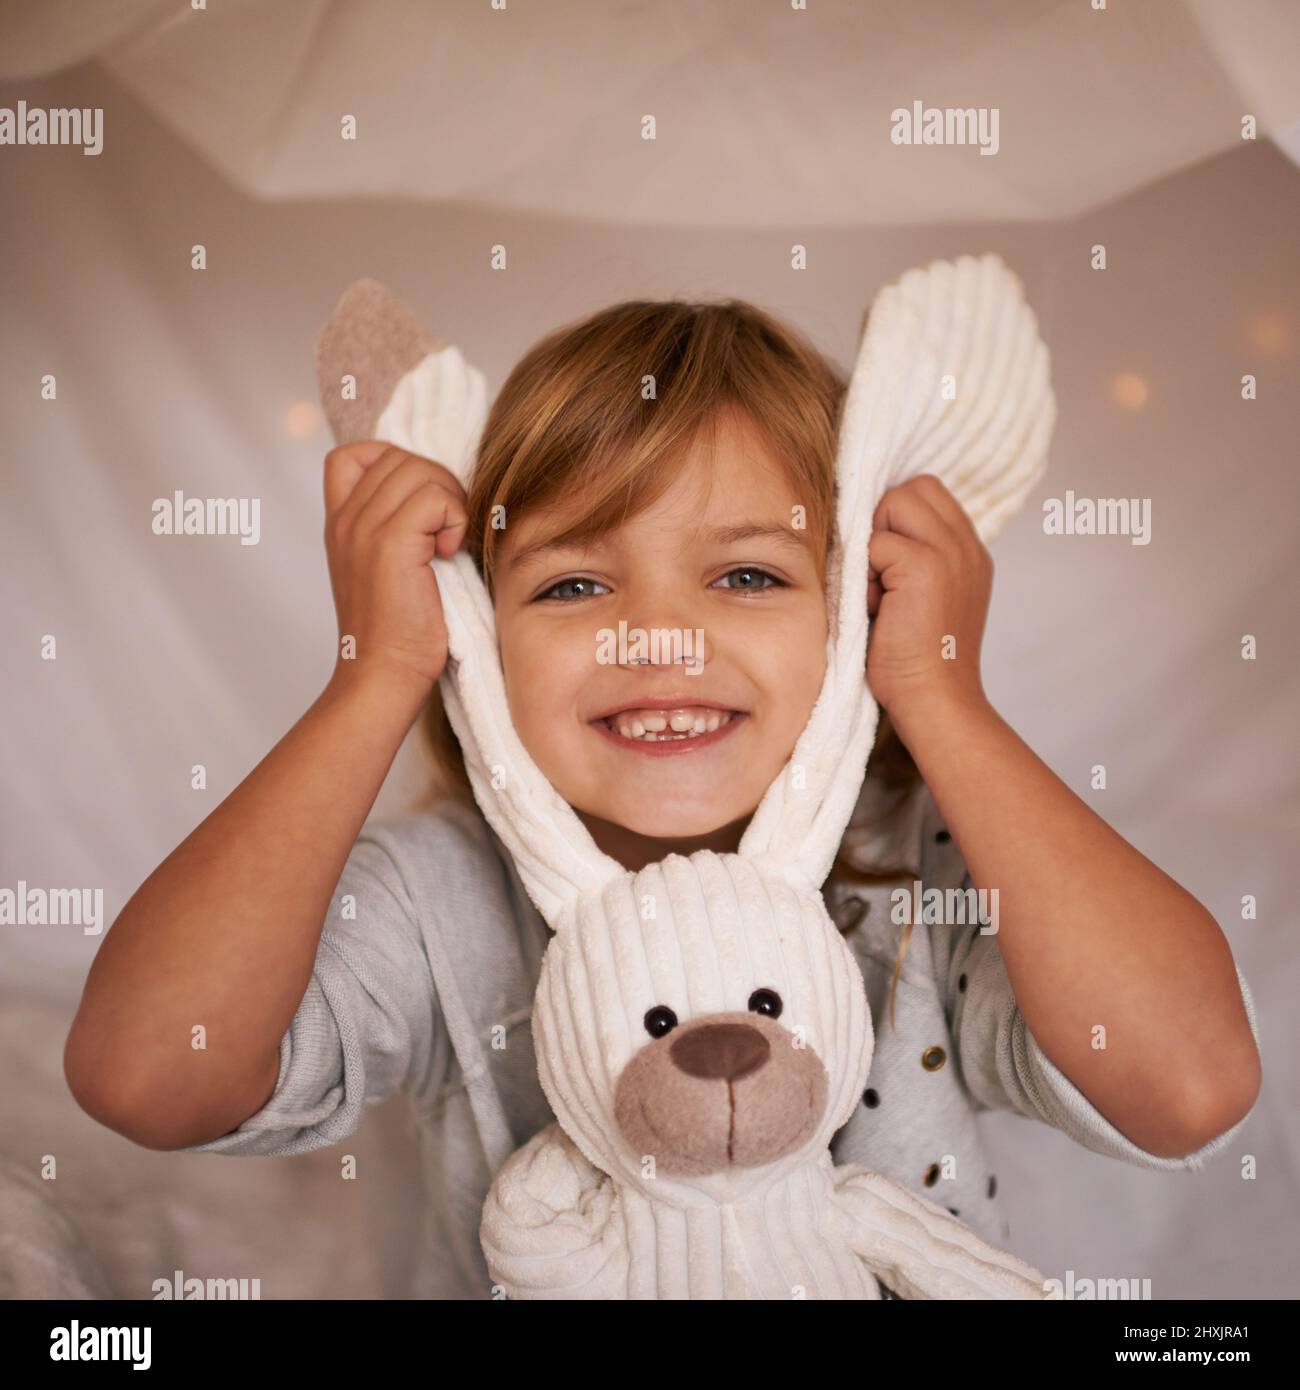 My funny bunny. Portrait of an adorable little girl playfully holding her toy rabbit. Stock Photo